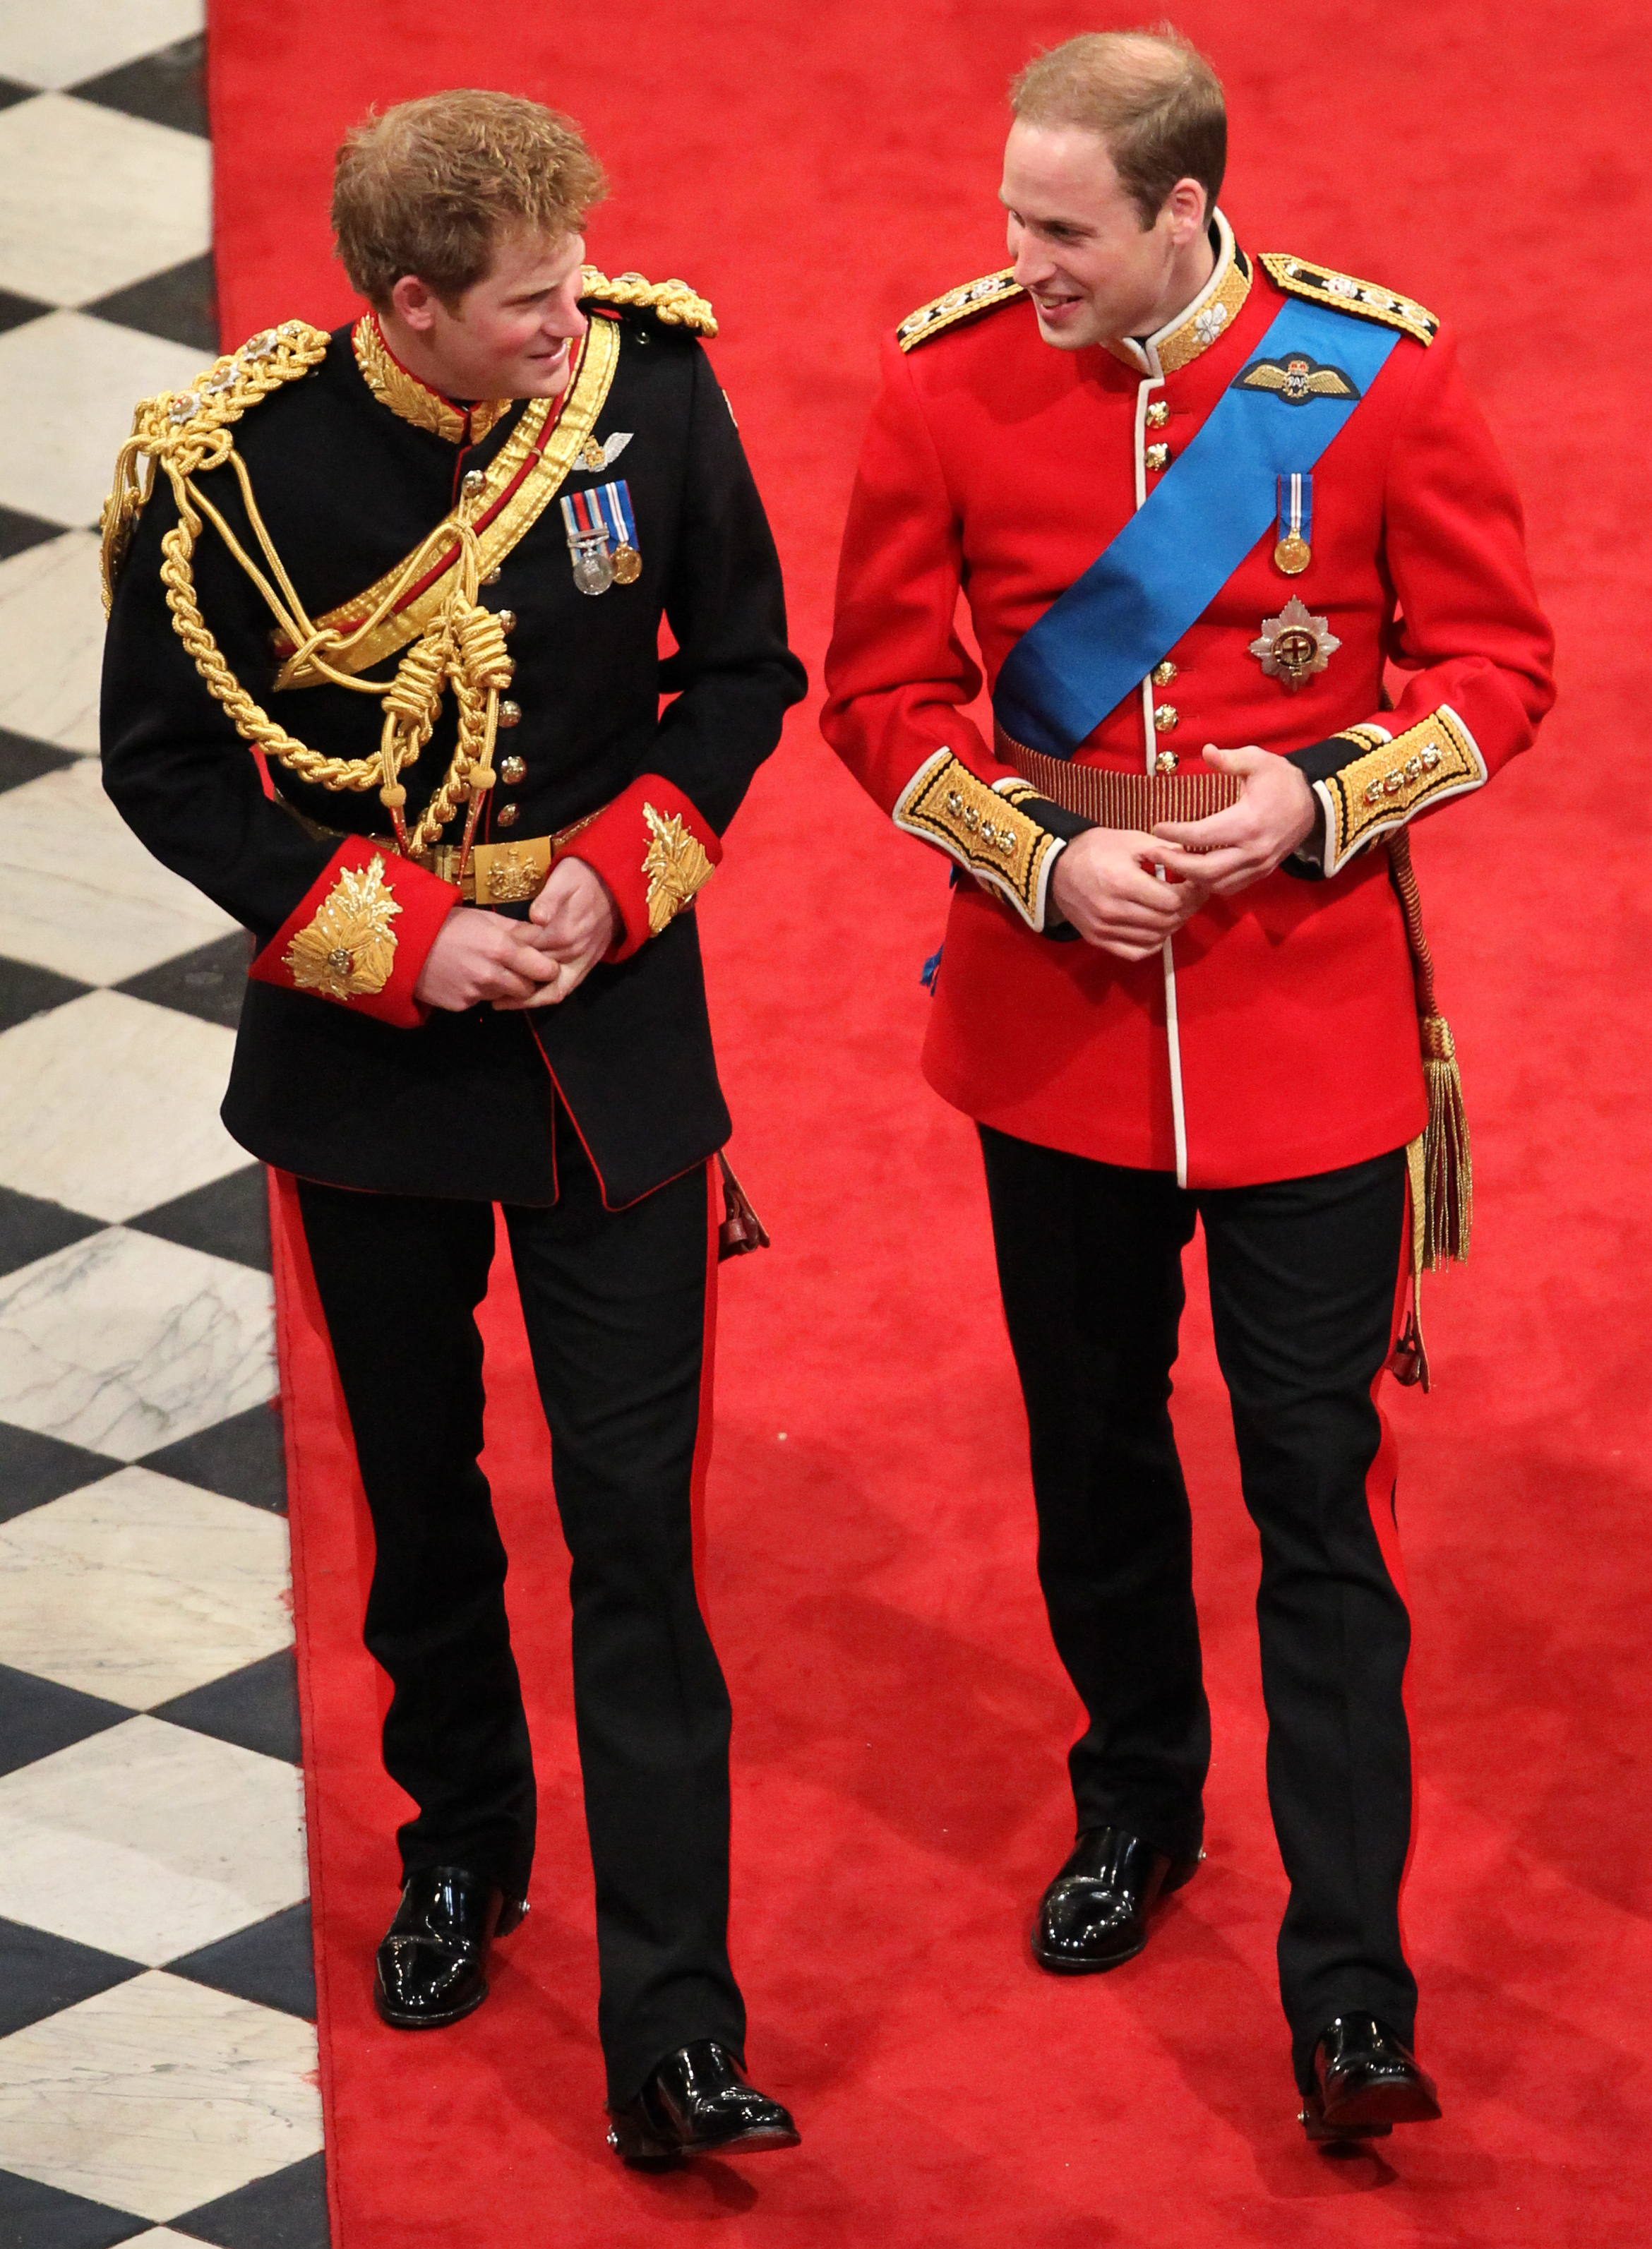 Prince Harry and Prince William at Westminster Abbey, London, for the wedding of William and Catherine Middleton. (Andrew Milligan - PA Images—PA Images via Getty Images)